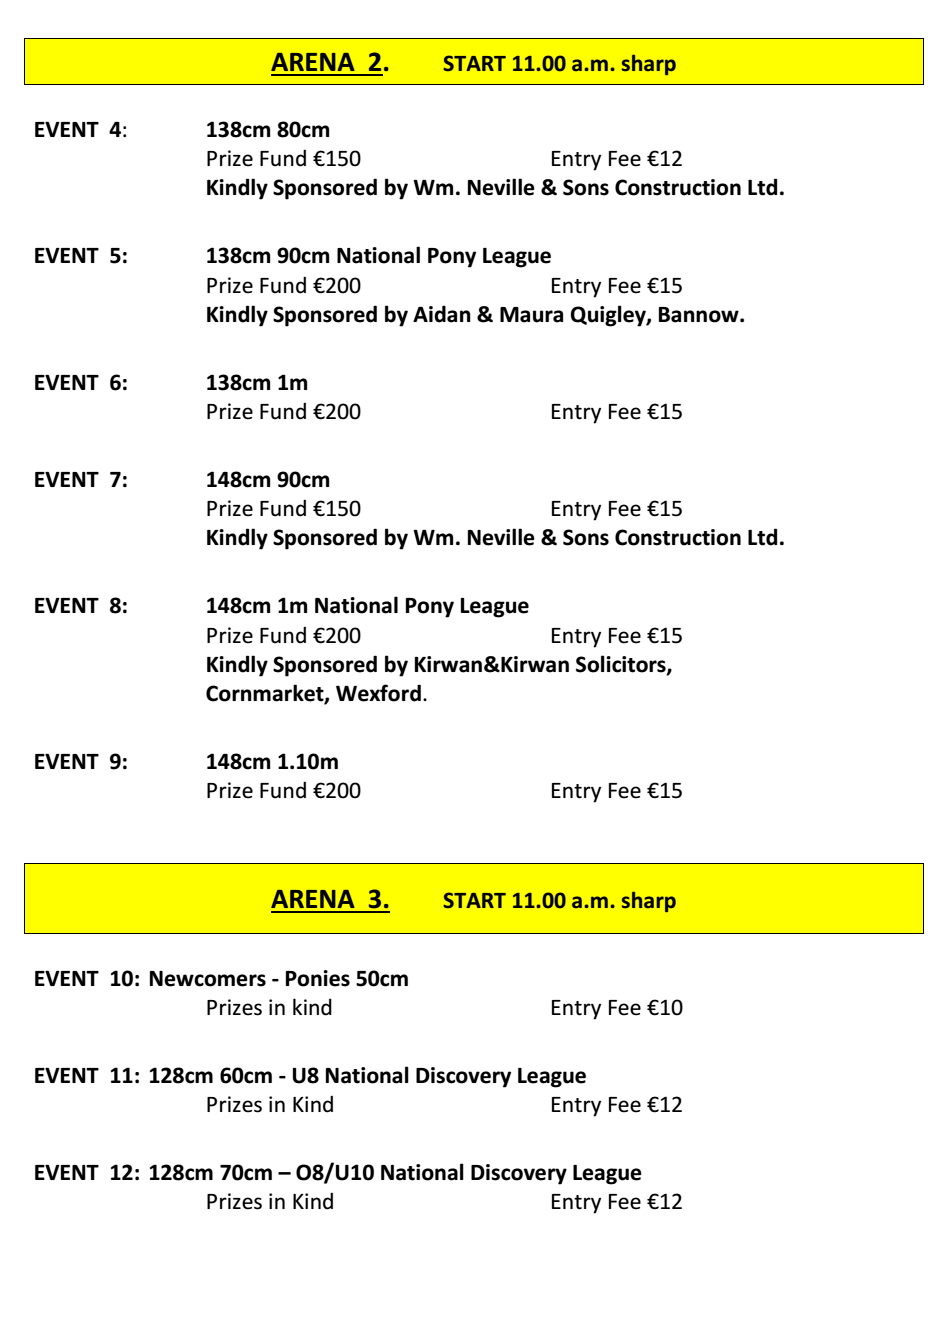 Amended Show Jumping Schedule 2